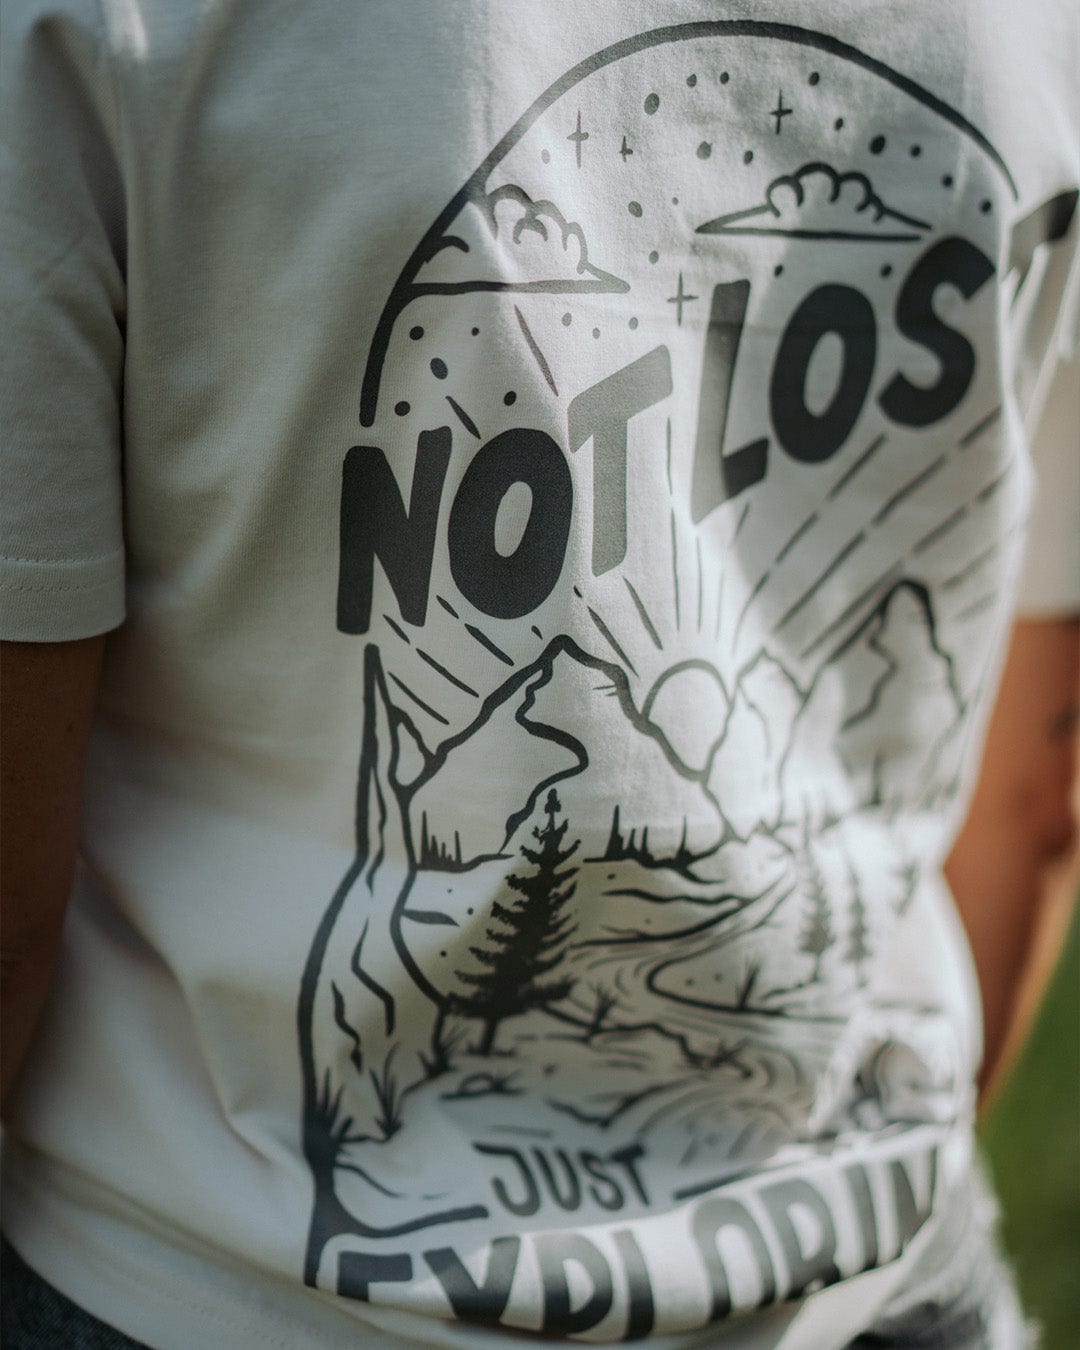 Not Lost Organic T-Shirt - Vintage White